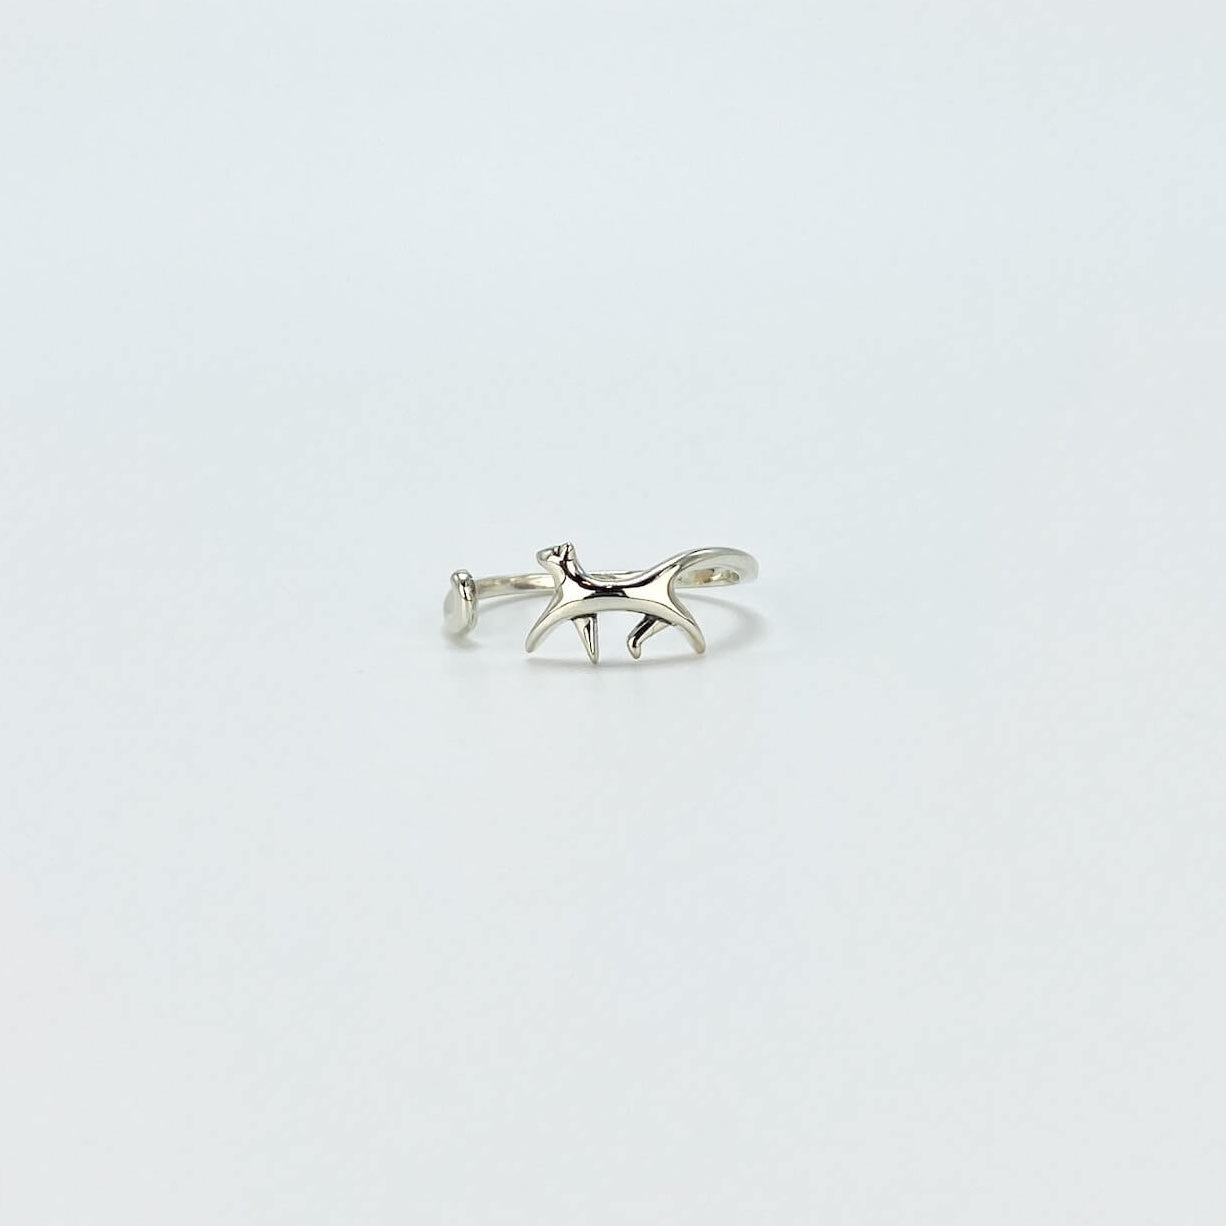 Sterling silver ring in the shape of a cat walking. Open, adjustable band.